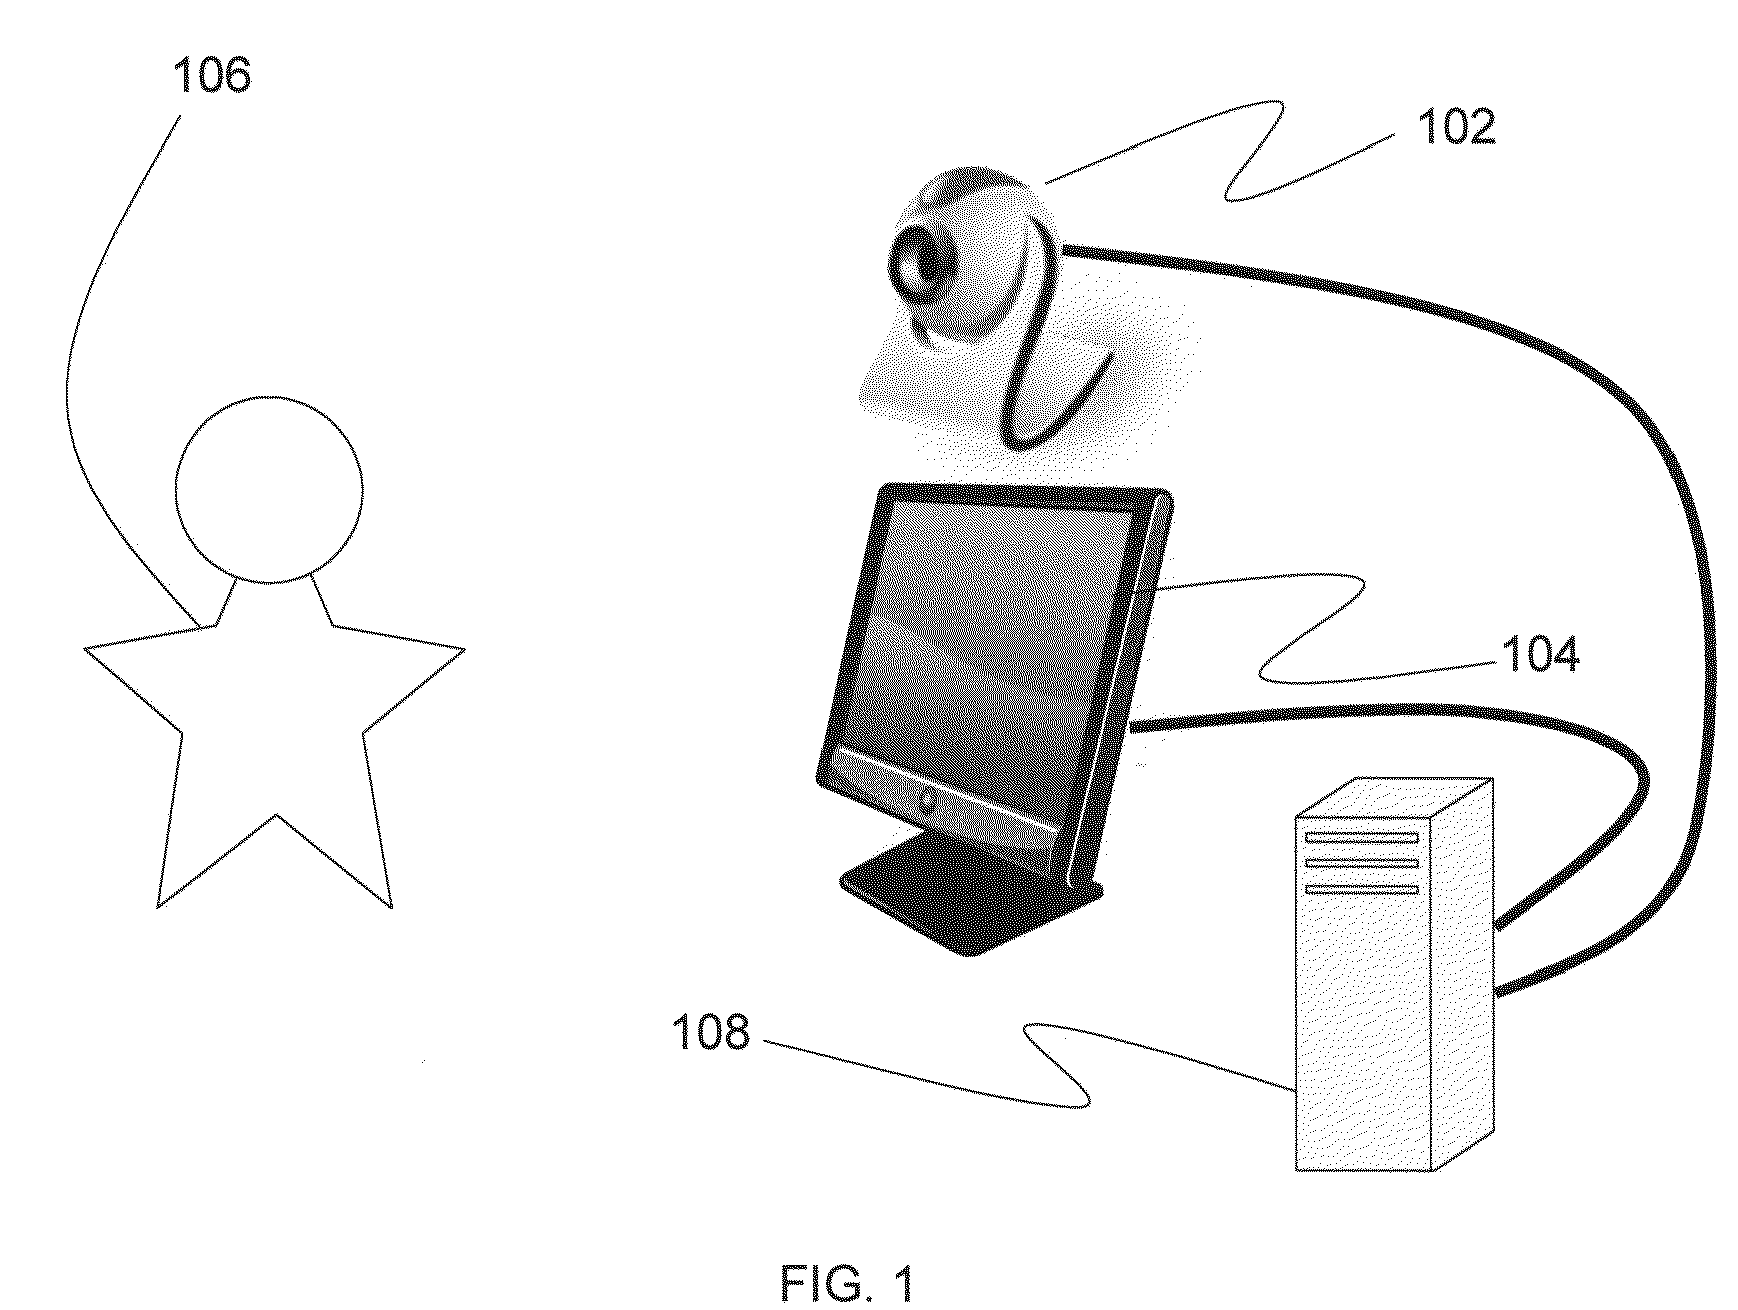 Systems and methods for incorporating reflection of a user and surrounding environment into a graphical user interface